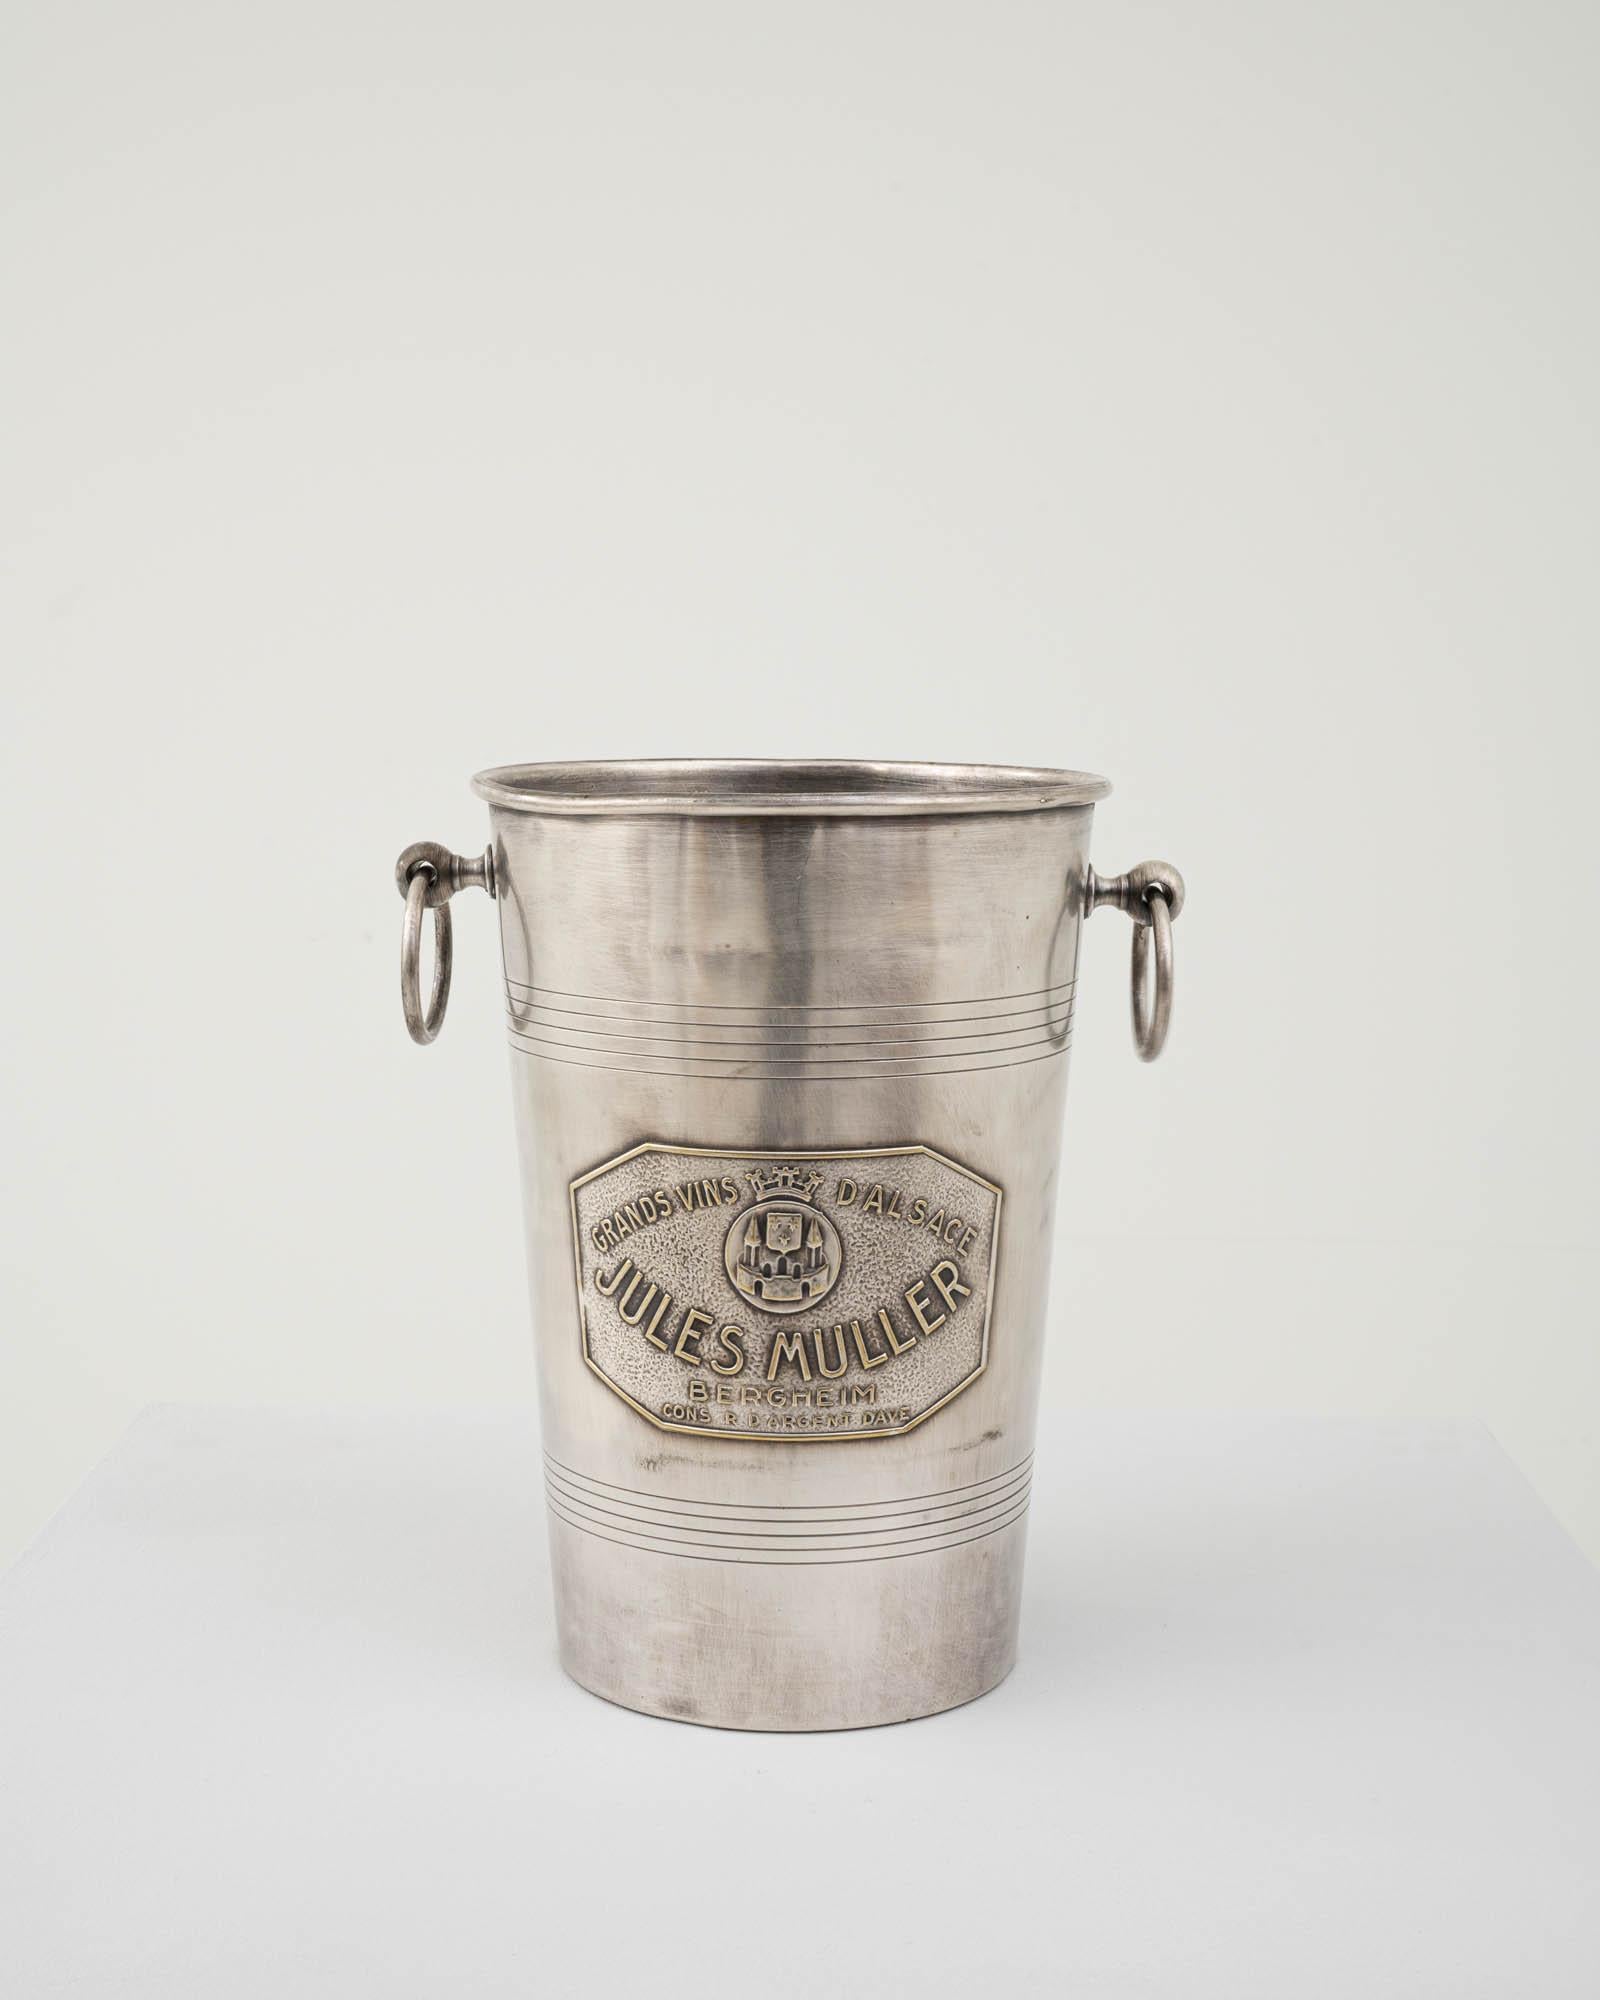 This vintage ice bucket evokes the glamorous parties of yesteryear. From before the era of refrigeration, this was an essential appliance for every party or quiet evening refreshment. Made in France in the 20th century, this bucket was likely used